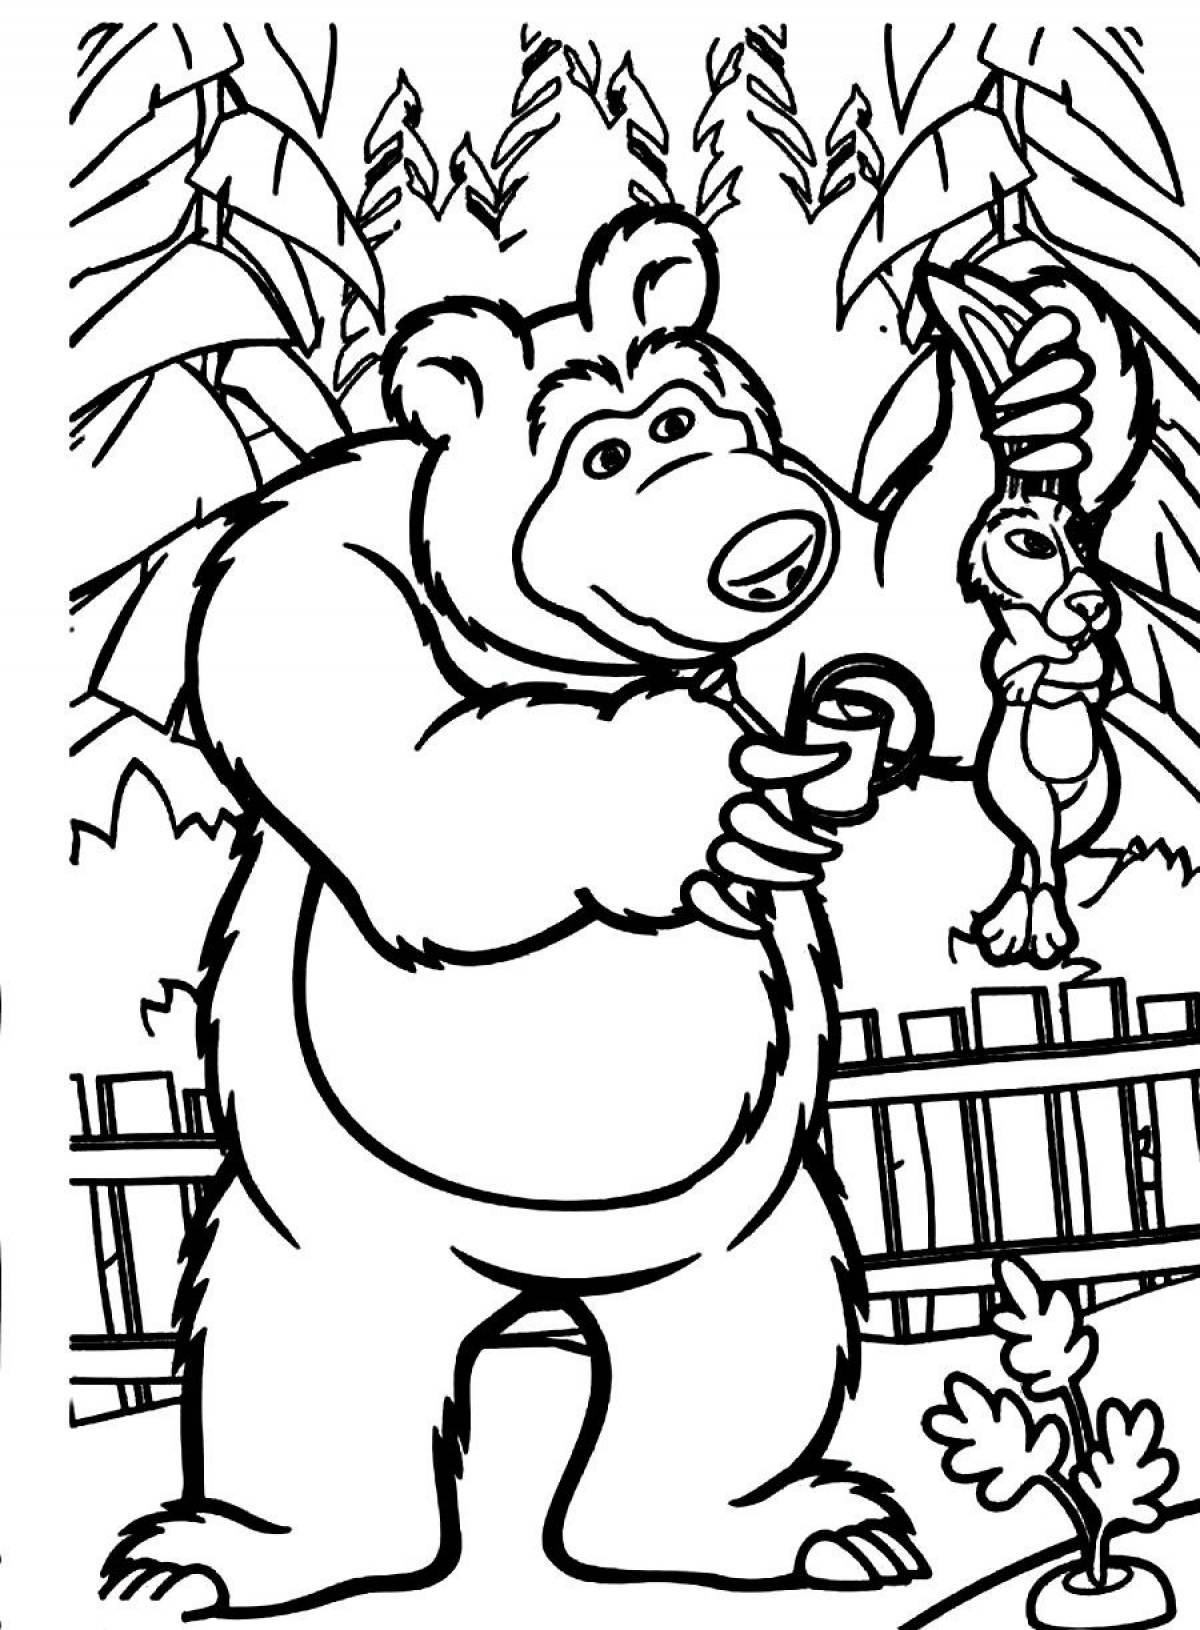 Coloring page bear and hare